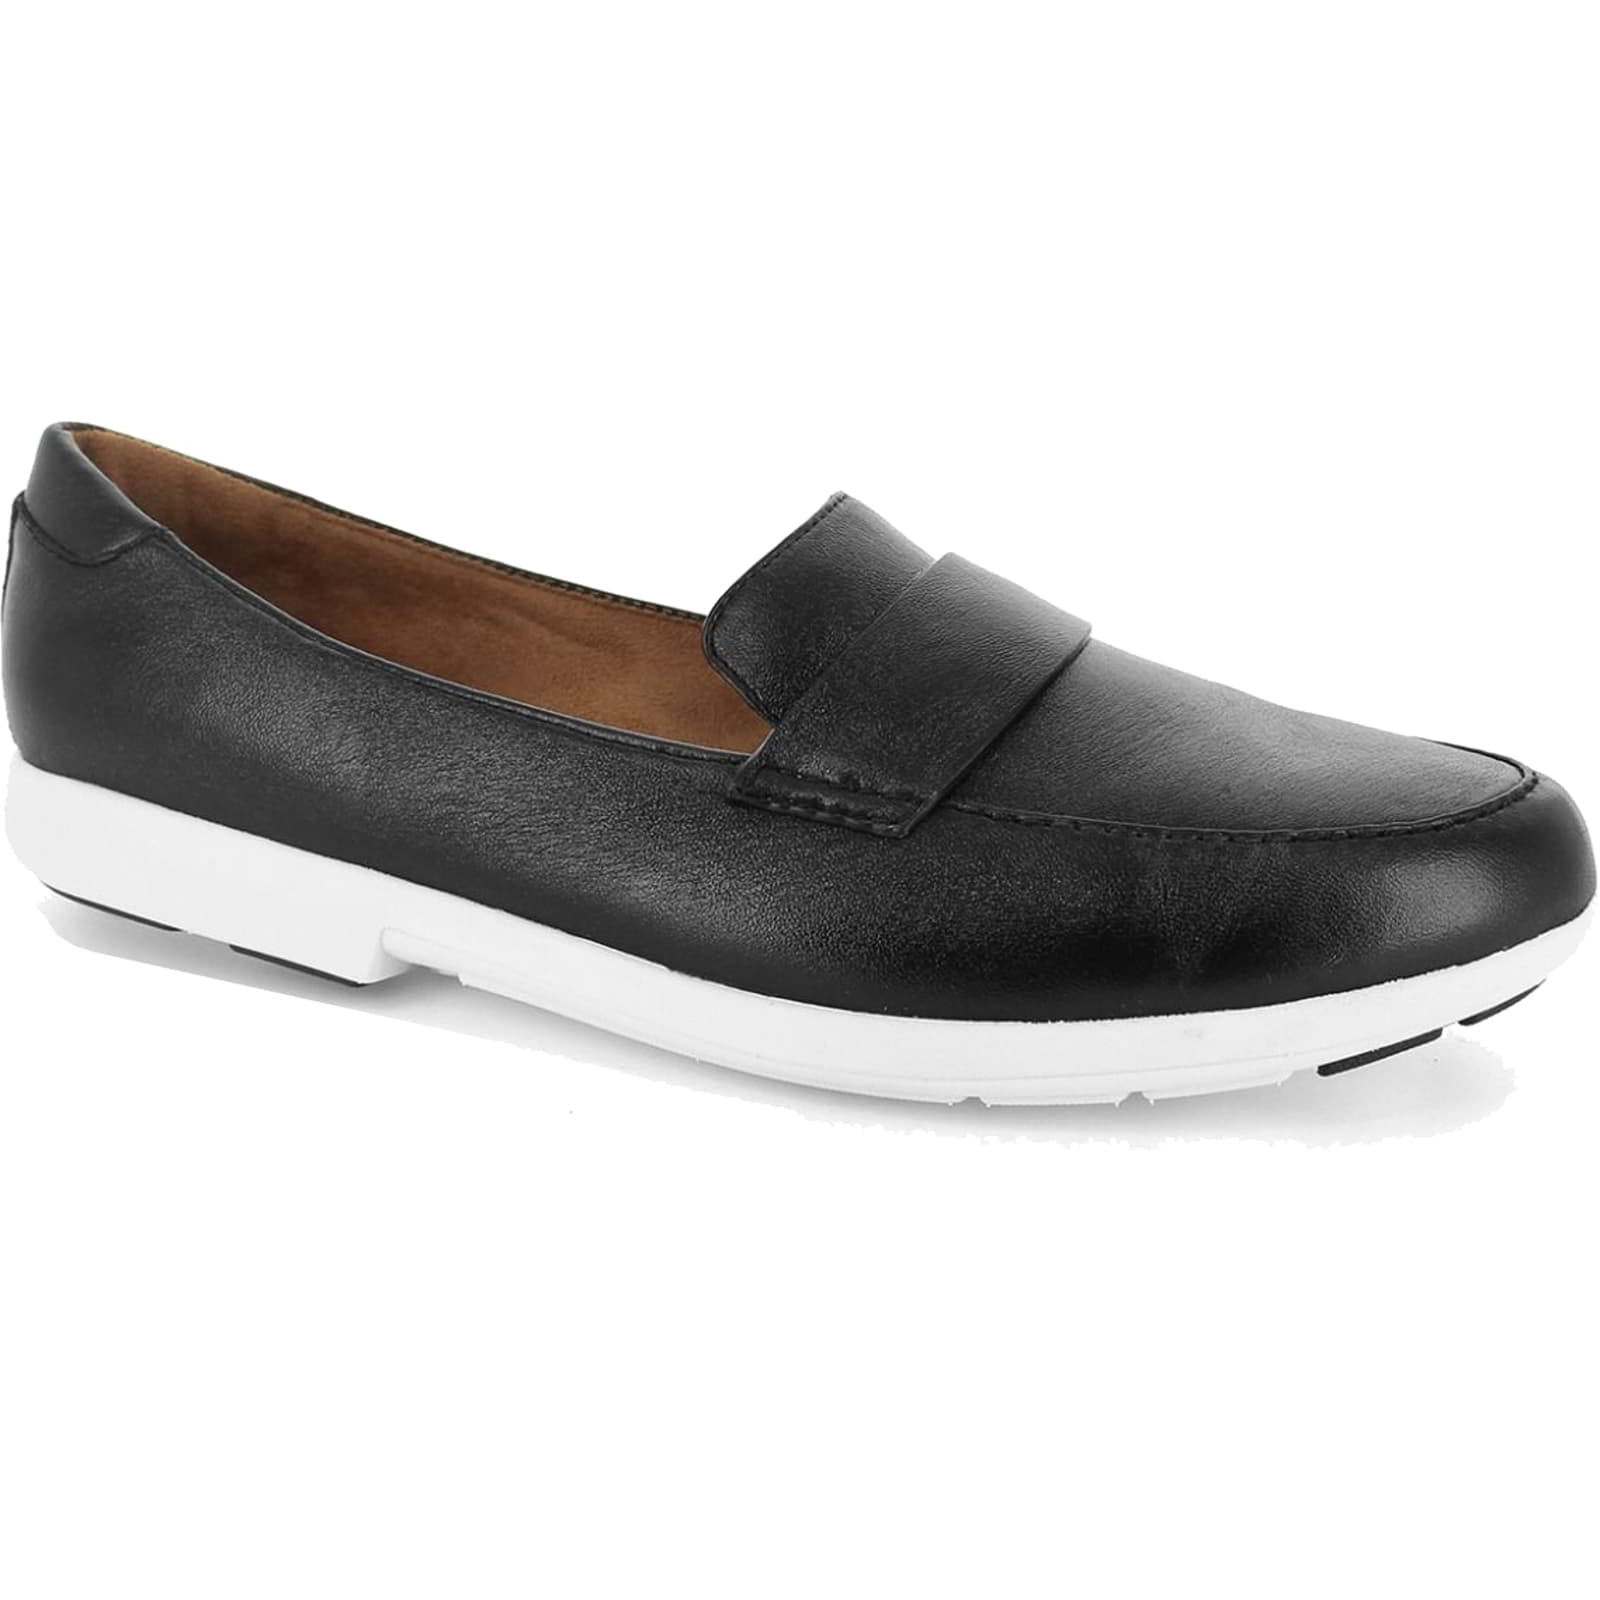 Strive Women's Milan Slip On Loafers Shoes - Black Leather - UK 5